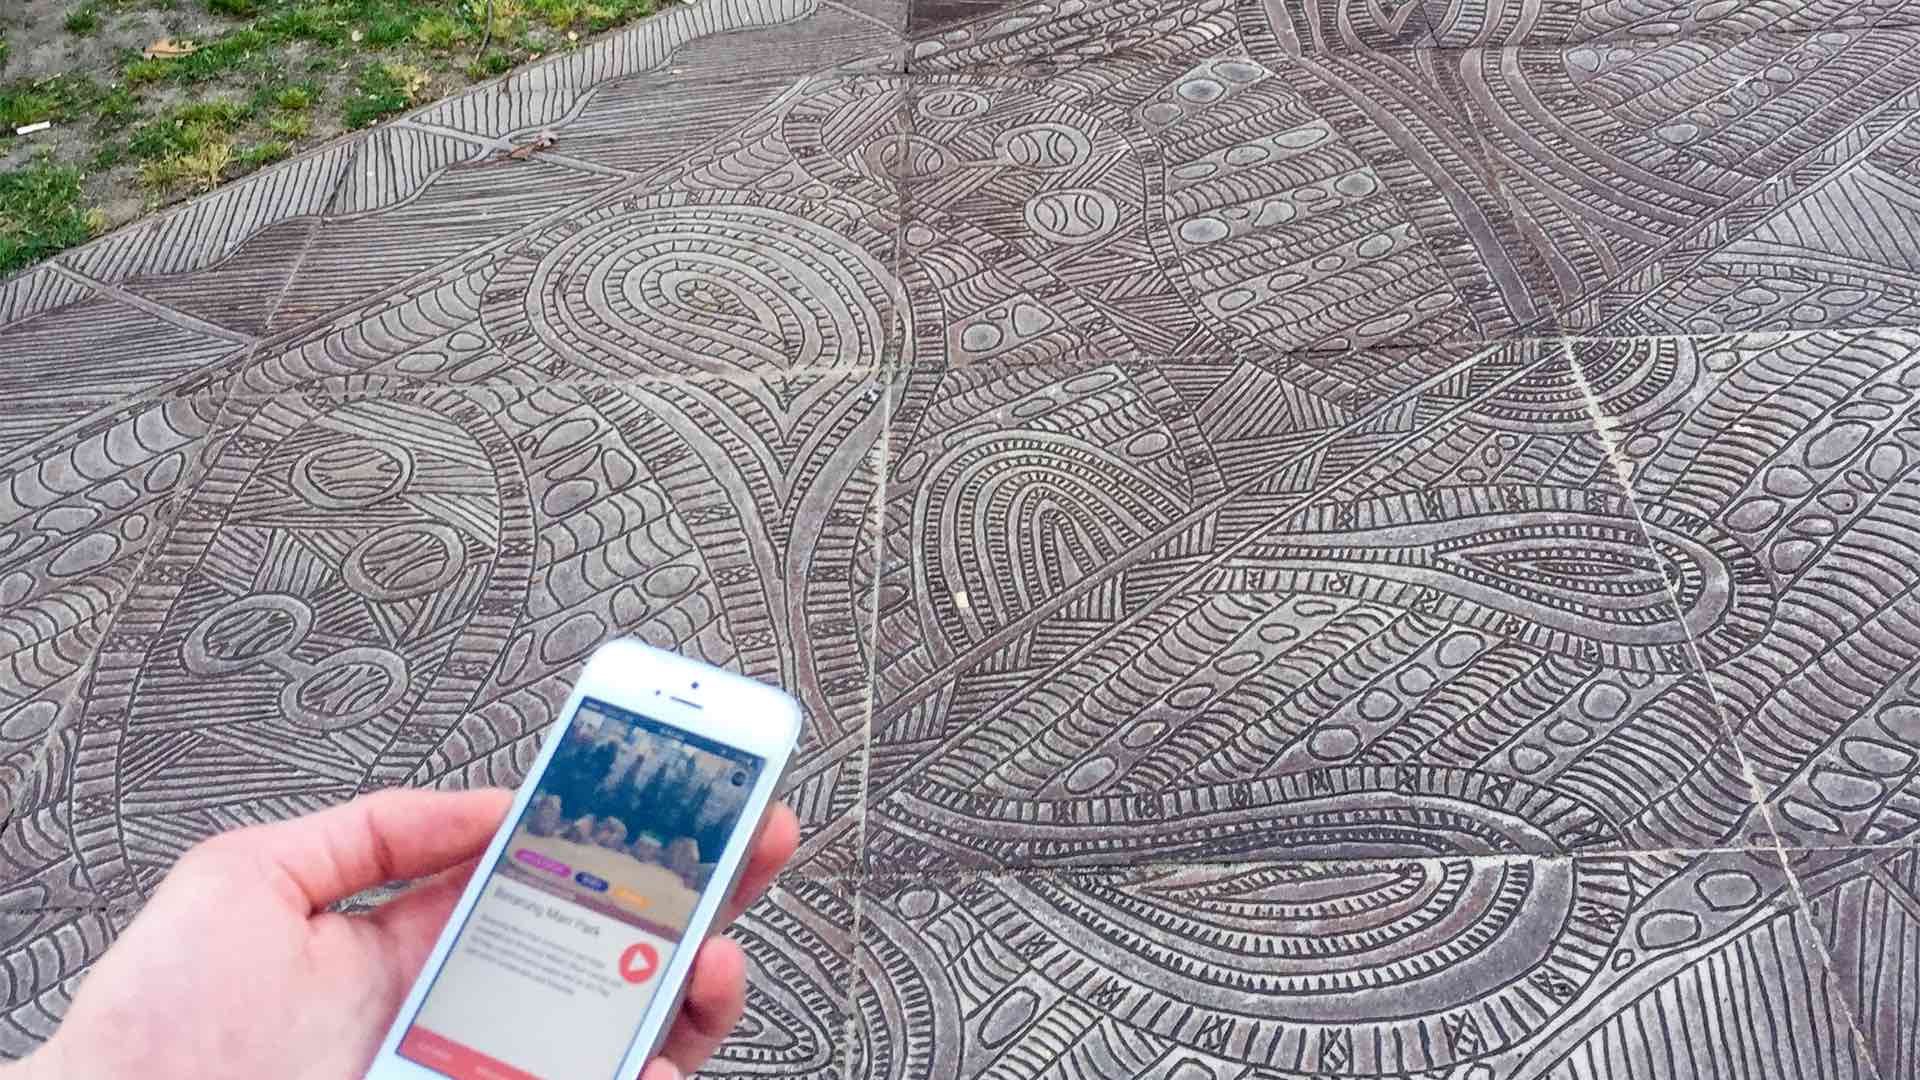 New App Melbourne Dreaming Helps You Discover the City's Indigenous History